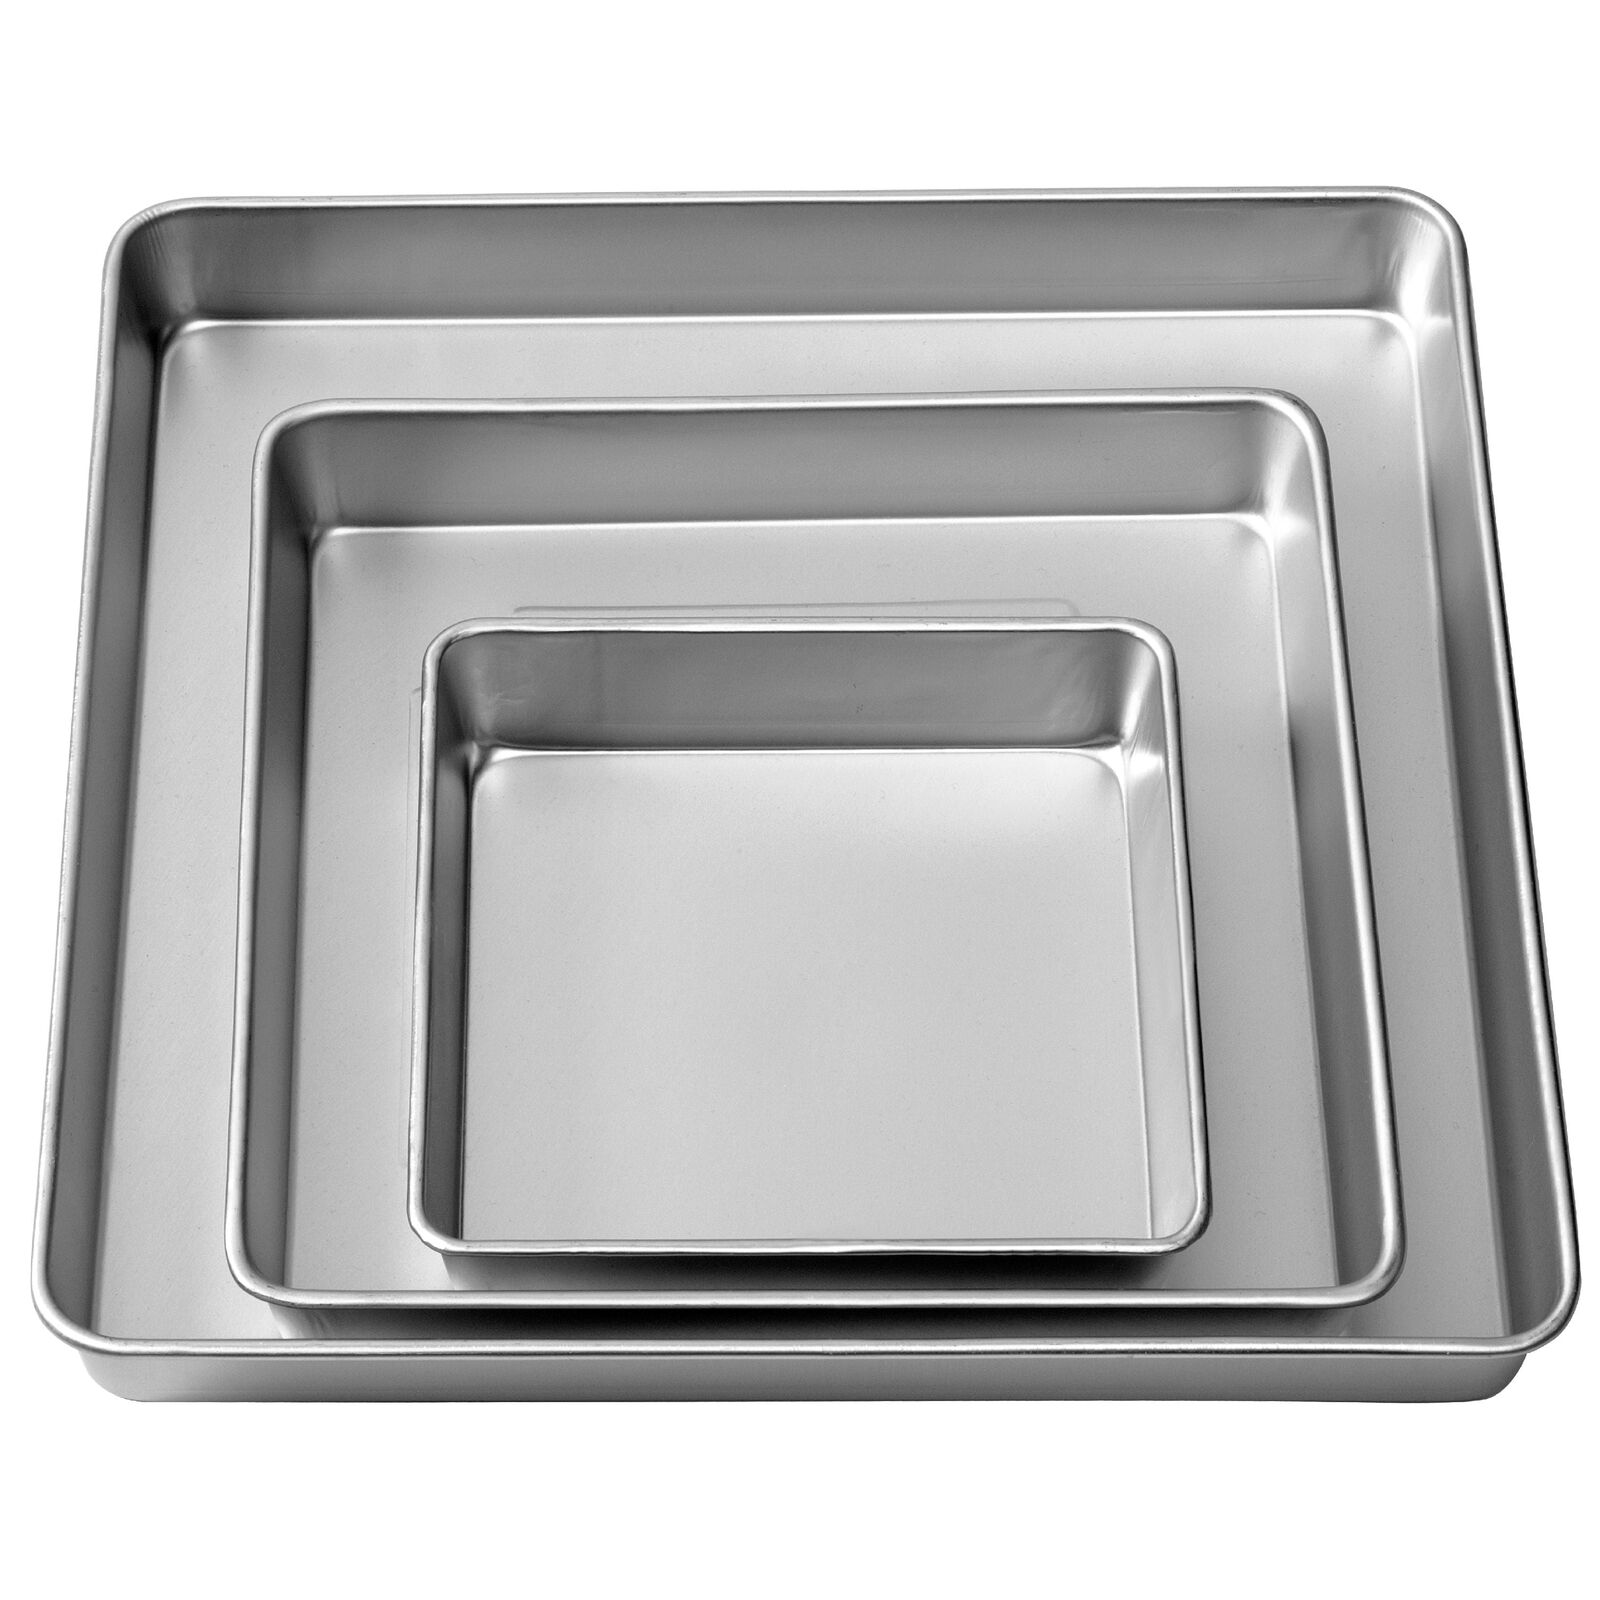 Performance Pans Square Cake Pans Set, 3 Piece - 8, 12 and 16-Inch Cake Pans